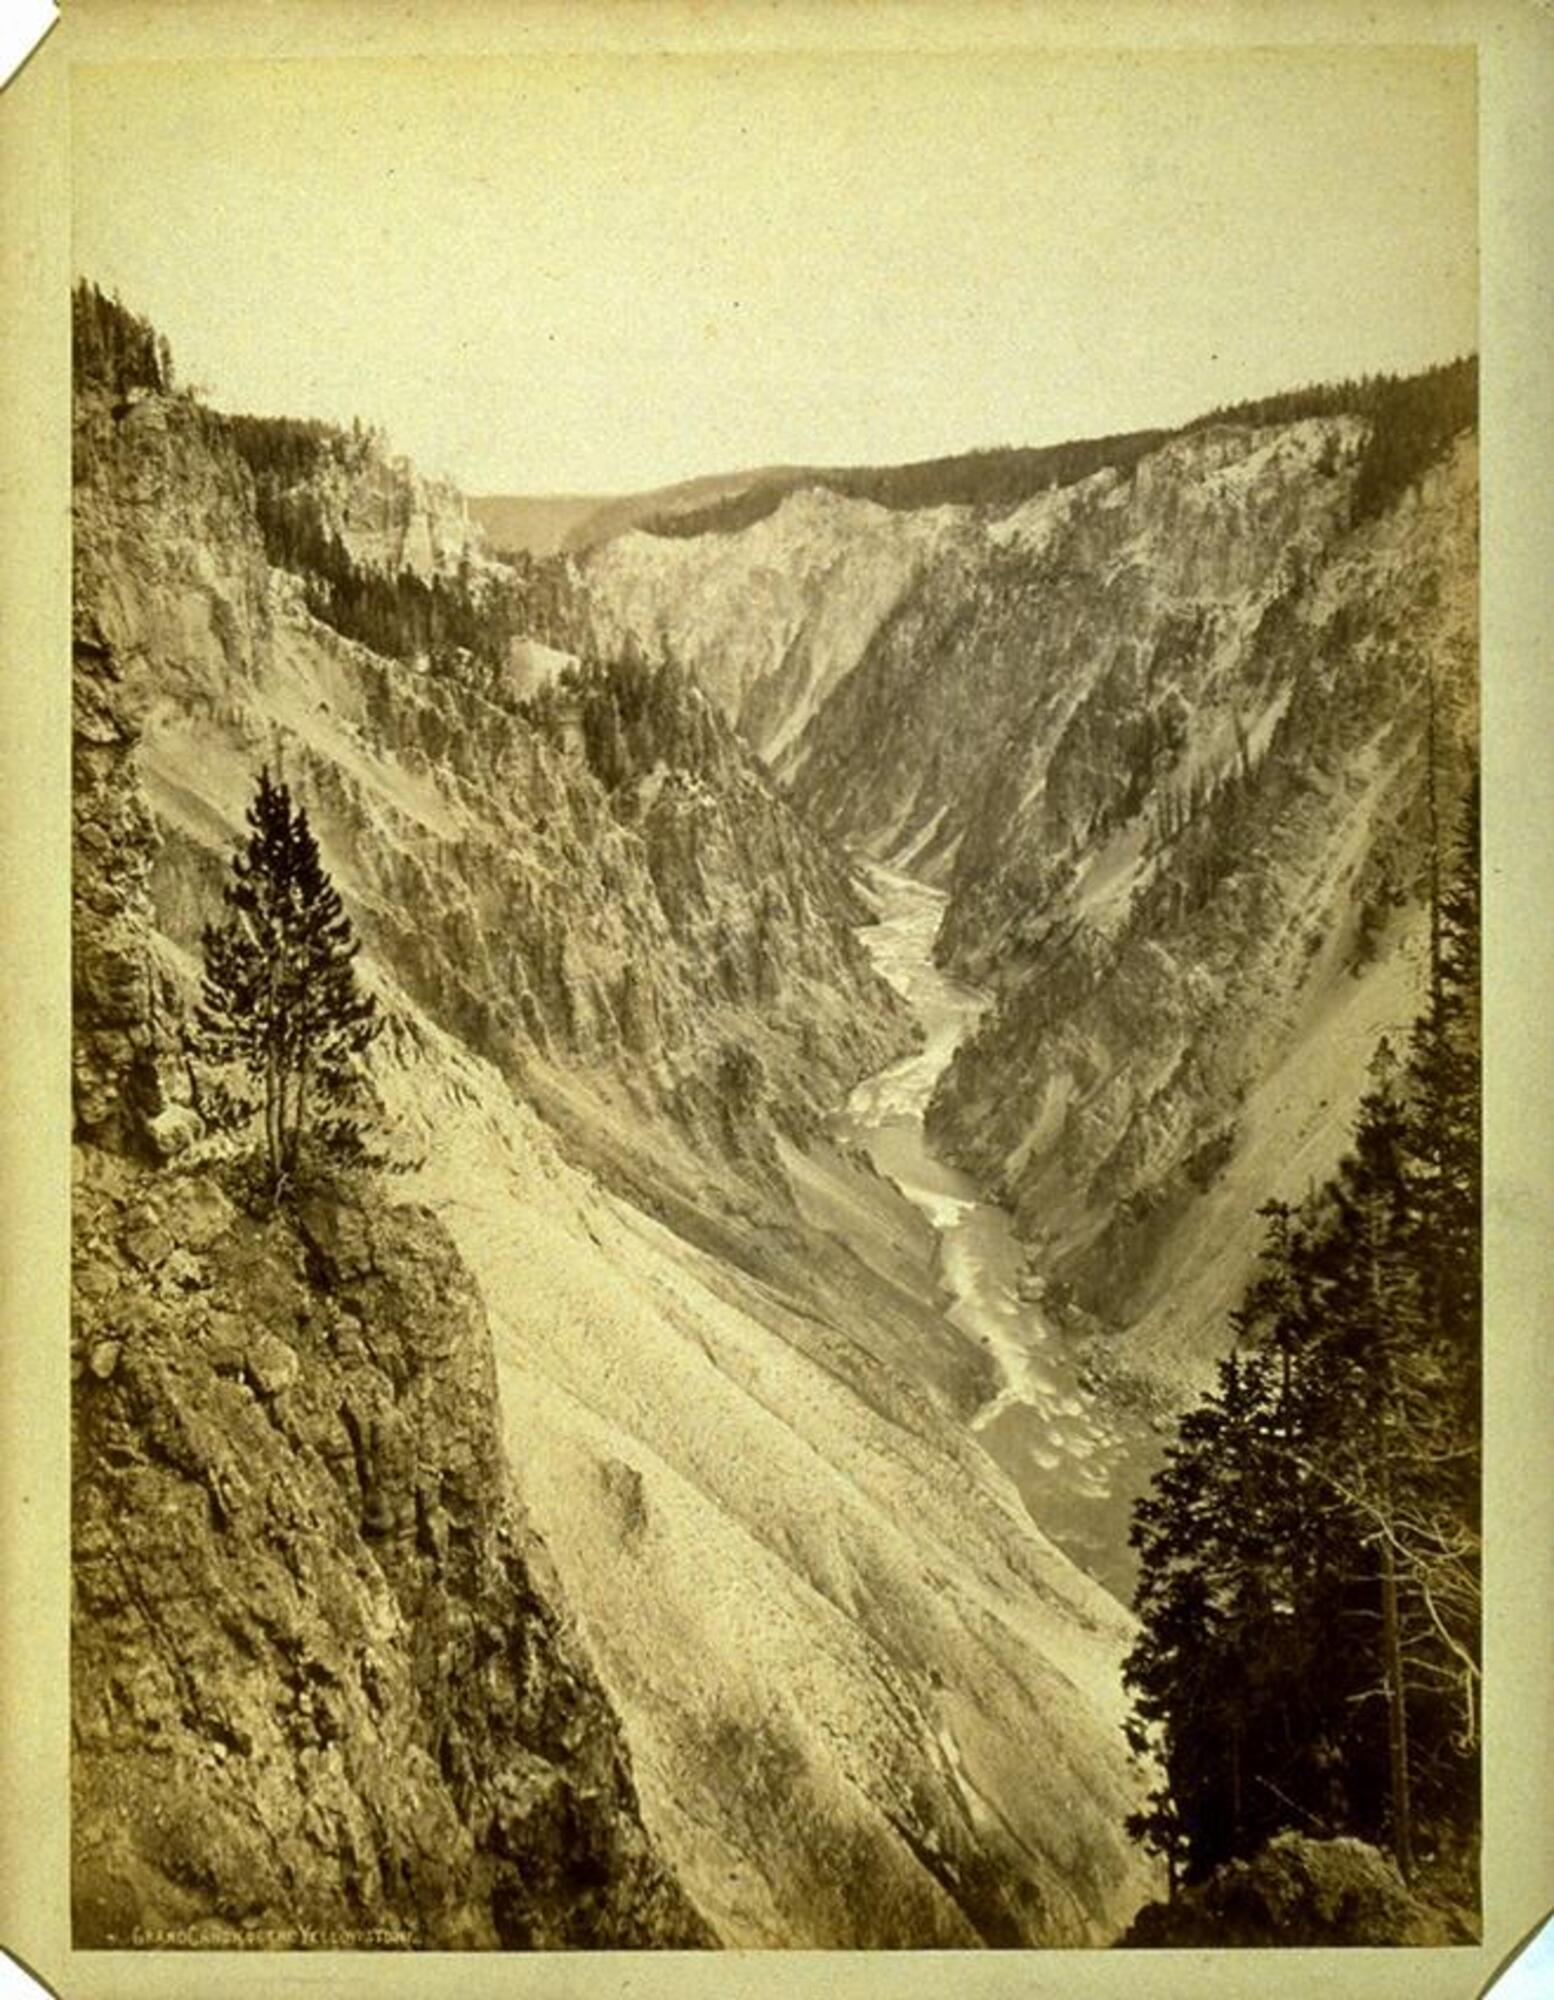 Photographed from a high vantage point, this image depicts a vertical view looking down into a rugged canyon with a river running along its bottom.